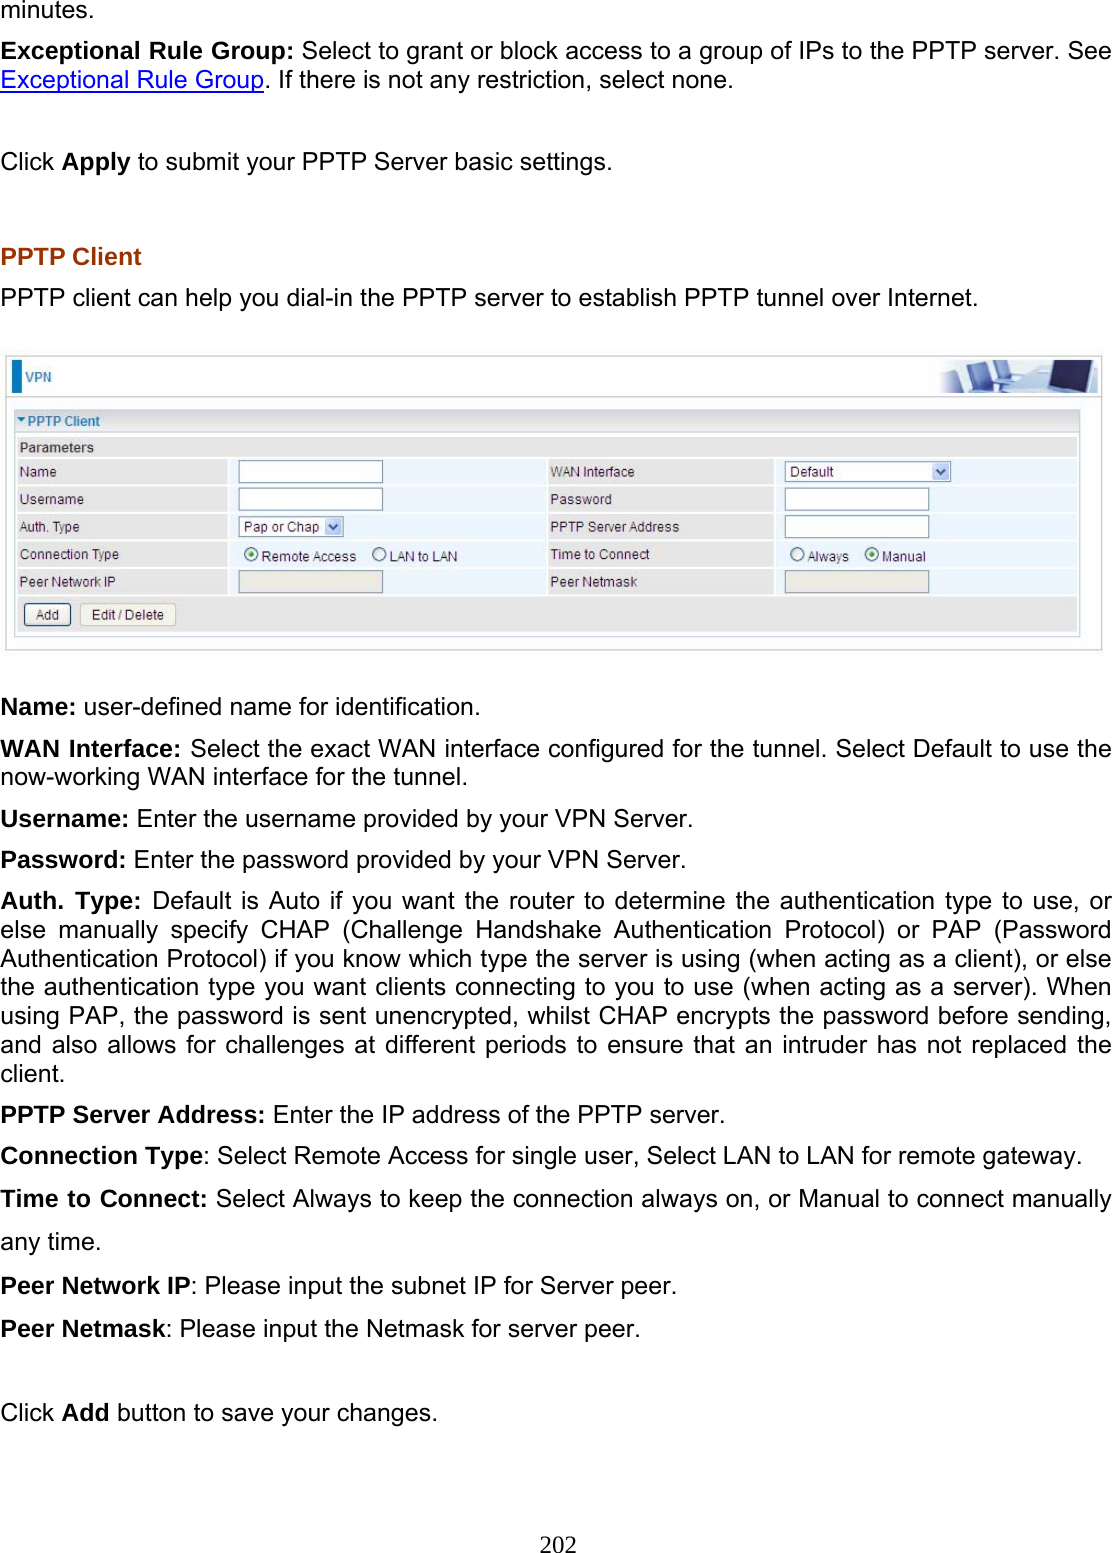 202 minutes. Exceptional Rule Group: Select to grant or block access to a group of IPs to the PPTP server. See Exceptional Rule Group. If there is not any restriction, select none.  Click Apply to submit your PPTP Server basic settings.  PPTP Client PPTP client can help you dial-in the PPTP server to establish PPTP tunnel over Internet.  Name: user-defined name for identification. WAN Interface: Select the exact WAN interface configured for the tunnel. Select Default to use the now-working WAN interface for the tunnel. Username: Enter the username provided by your VPN Server. Password: Enter the password provided by your VPN Server.  Auth. Type: Default is Auto if you want the router to determine the authentication type to use, or else manually specify CHAP (Challenge Handshake Authentication Protocol) or PAP (Password Authentication Protocol) if you know which type the server is using (when acting as a client), or else the authentication type you want clients connecting to you to use (when acting as a server). When using PAP, the password is sent unencrypted, whilst CHAP encrypts the password before sending, and also allows for challenges at different periods to ensure that an intruder has not replaced the client. PPTP Server Address: Enter the IP address of the PPTP server. Connection Type: Select Remote Access for single user, Select LAN to LAN for remote gateway. Time to Connect: Select Always to keep the connection always on, or Manual to connect manually any time. Peer Network IP: Please input the subnet IP for Server peer. Peer Netmask: Please input the Netmask for server peer.  Click Add button to save your changes. 